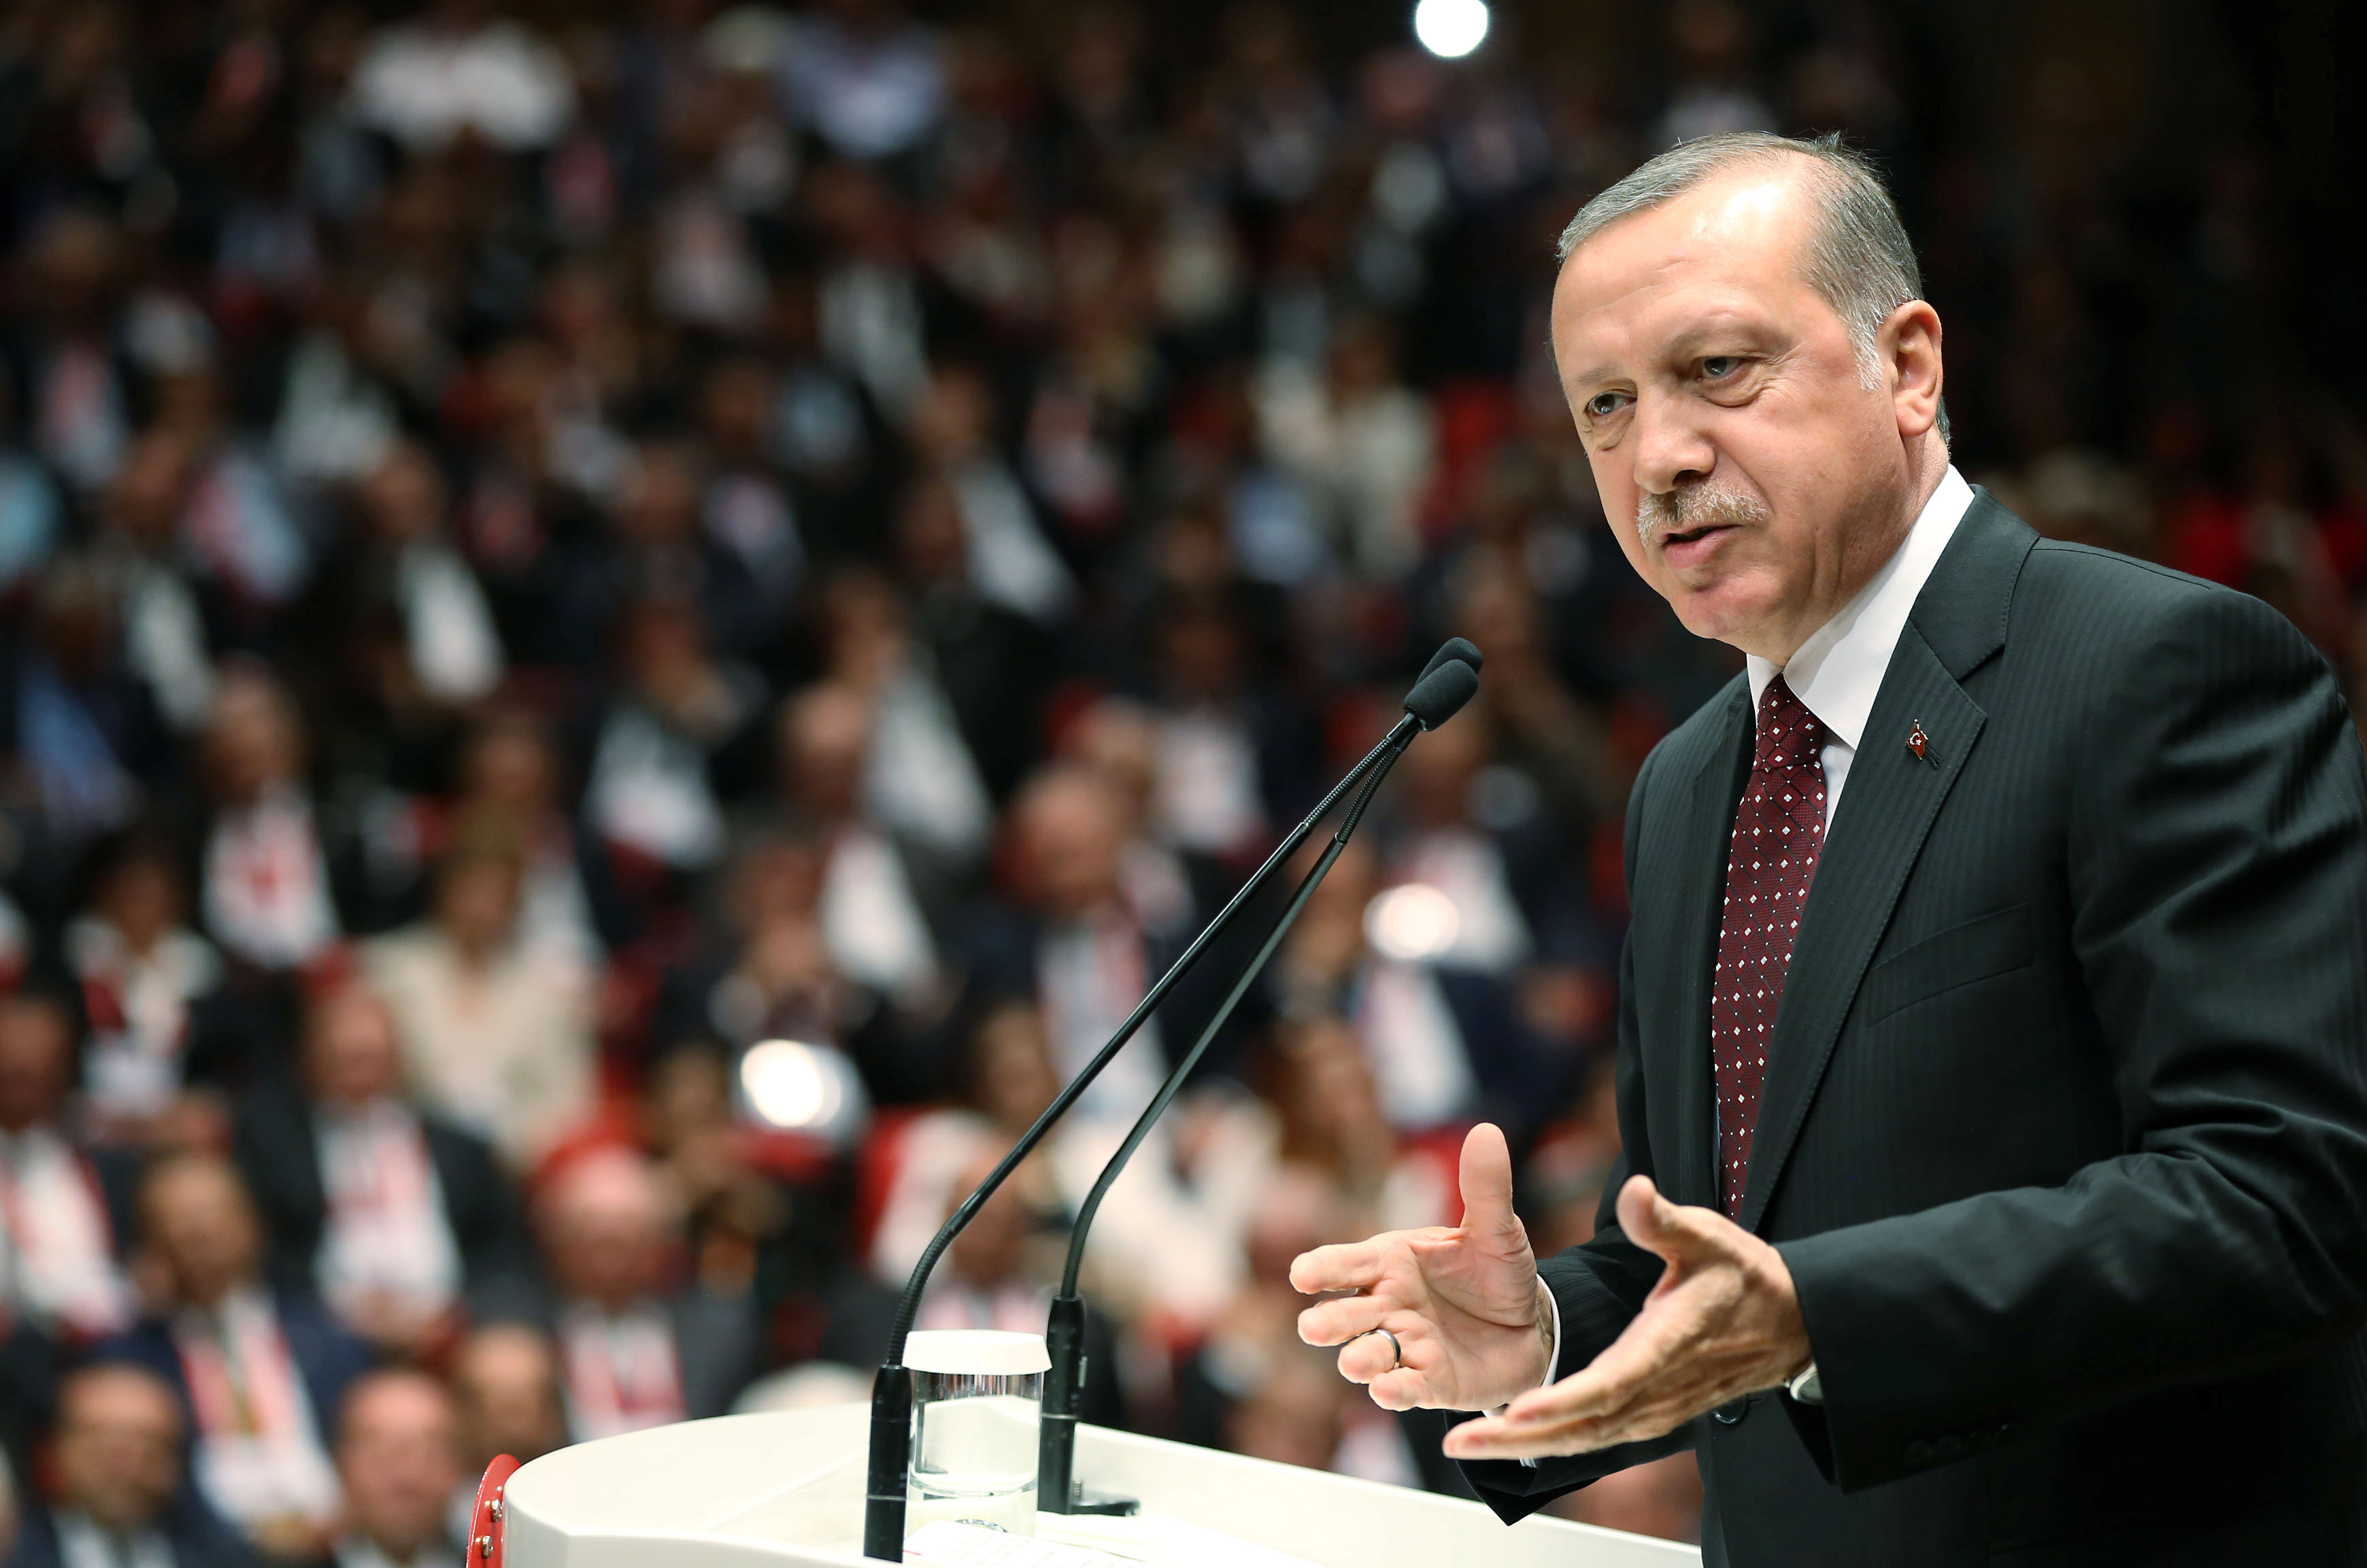 Europe a safe haven for political wings of terror groups, says Erdogan